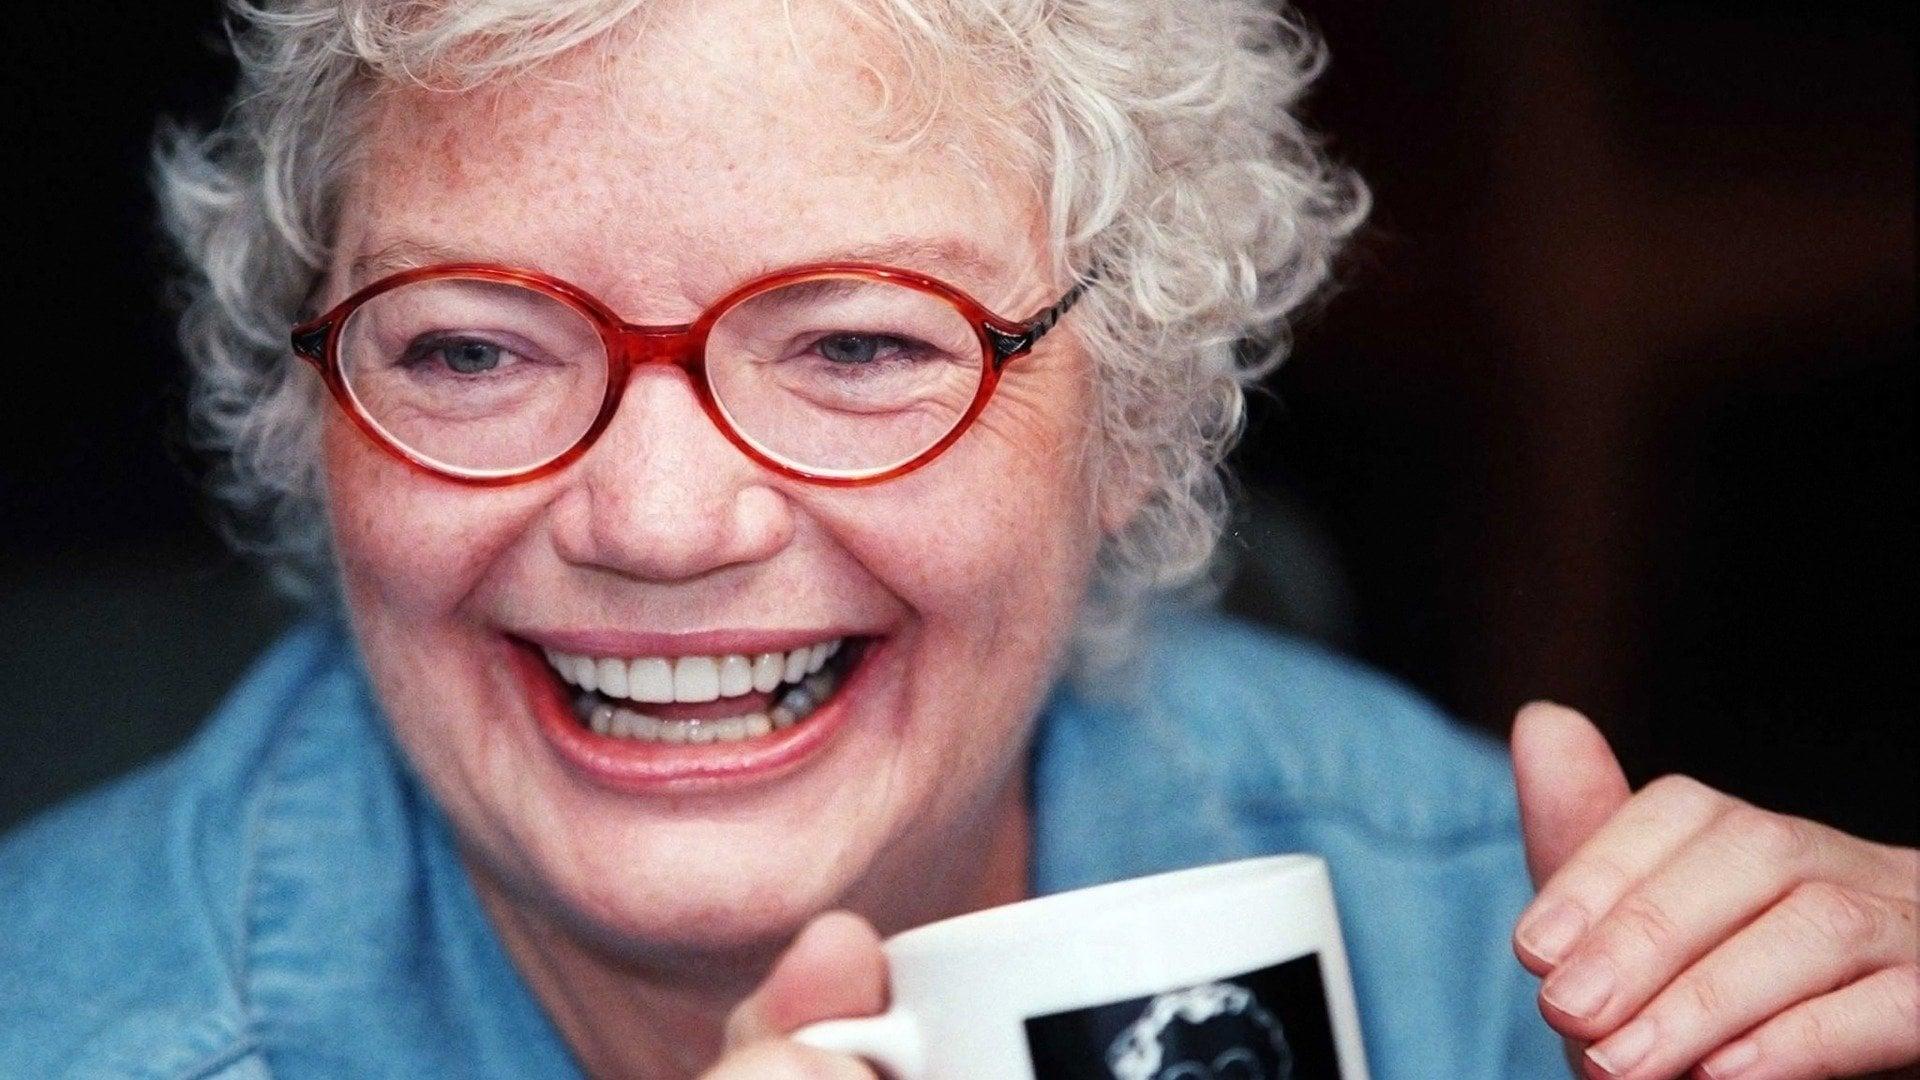 Raise Hell: The Life & Times of Molly Ivins backdrop